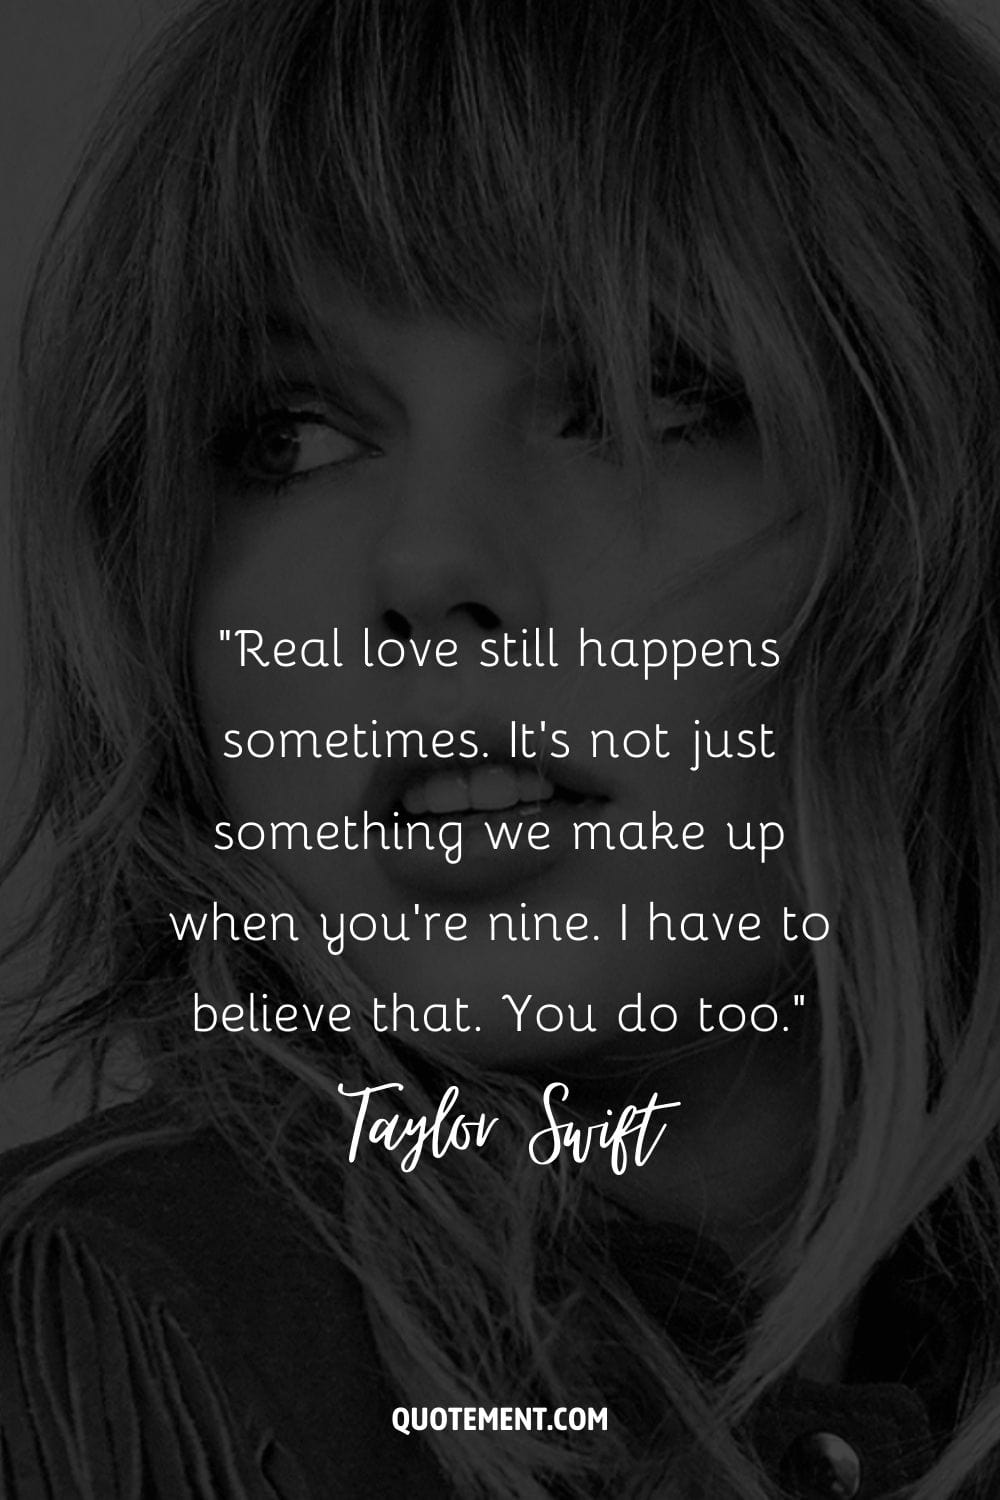 “Real love still happens sometimes. It's not just something we make up when you're nine. I have to believe that. You do too.” ― Taylor Swift